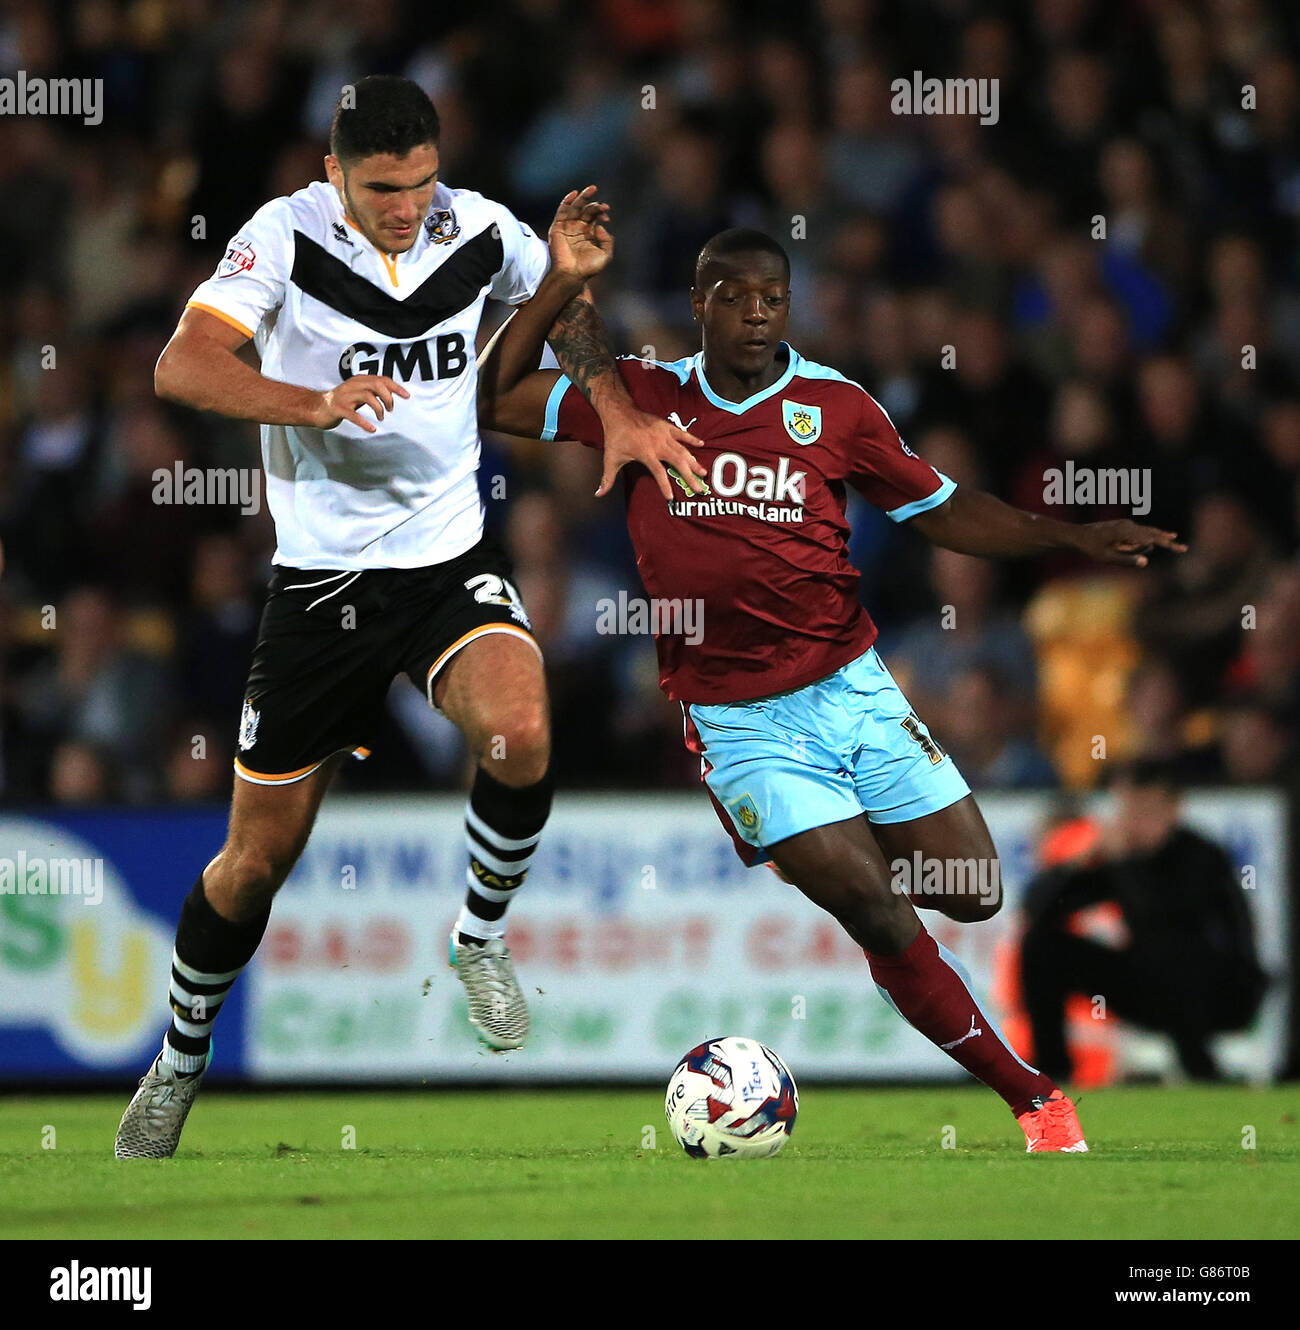 Burnley's Marvin Sordell battles for the ball with Port Vale's Ryan Inniss during the Capital One Cup, First Round match at Vale Park, Stoke-on-Trent. Stock Photo